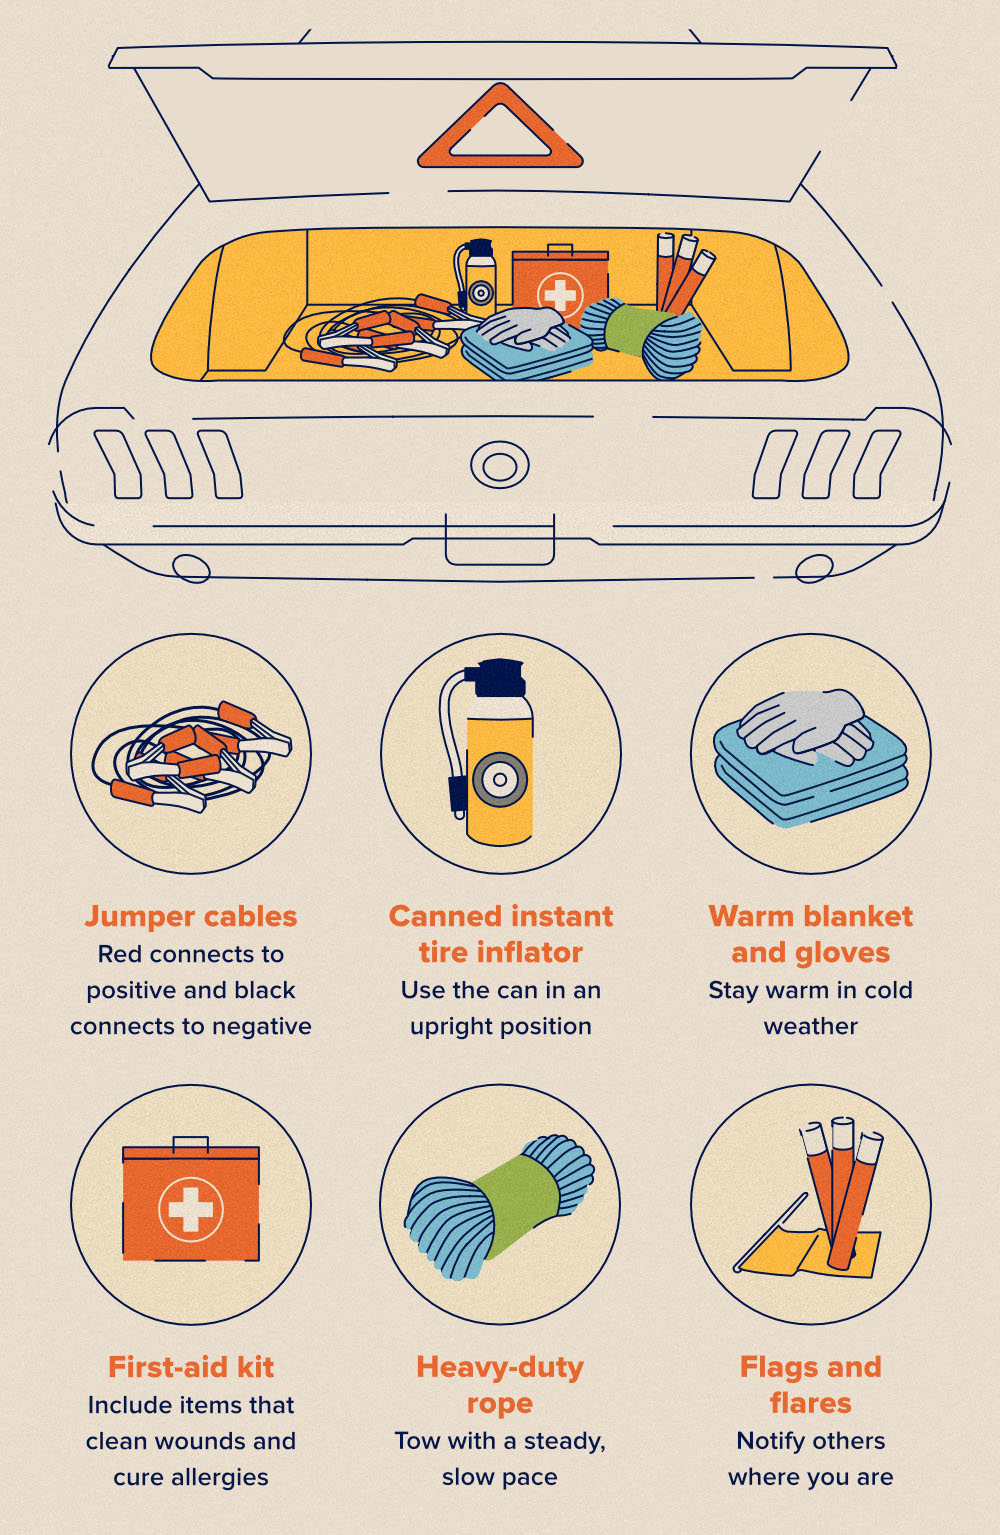 Image detailing items to keep in your trunk